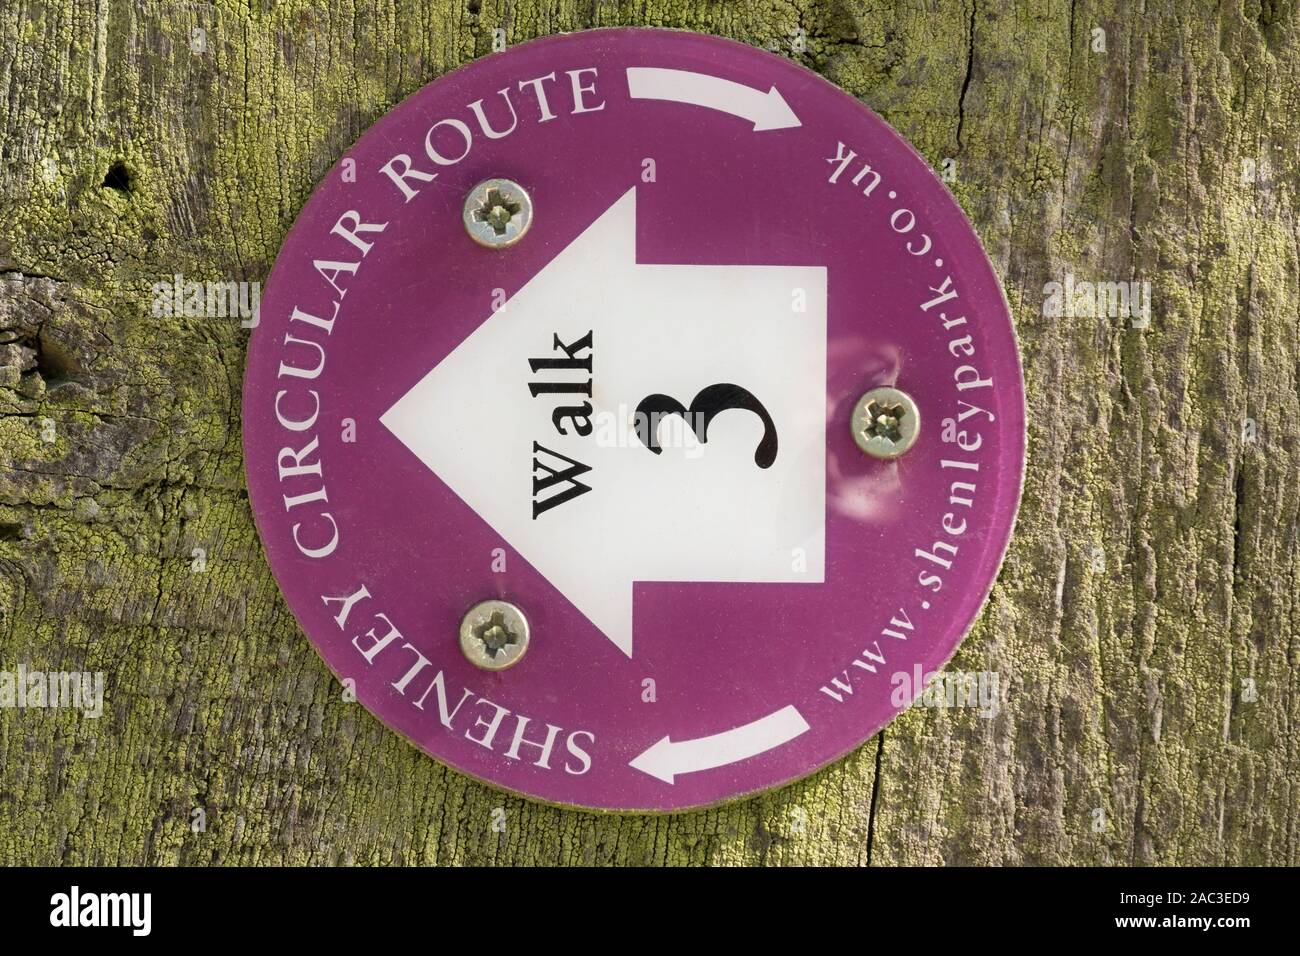 Directional sign for Shenley Walk no 3. Stock Photo